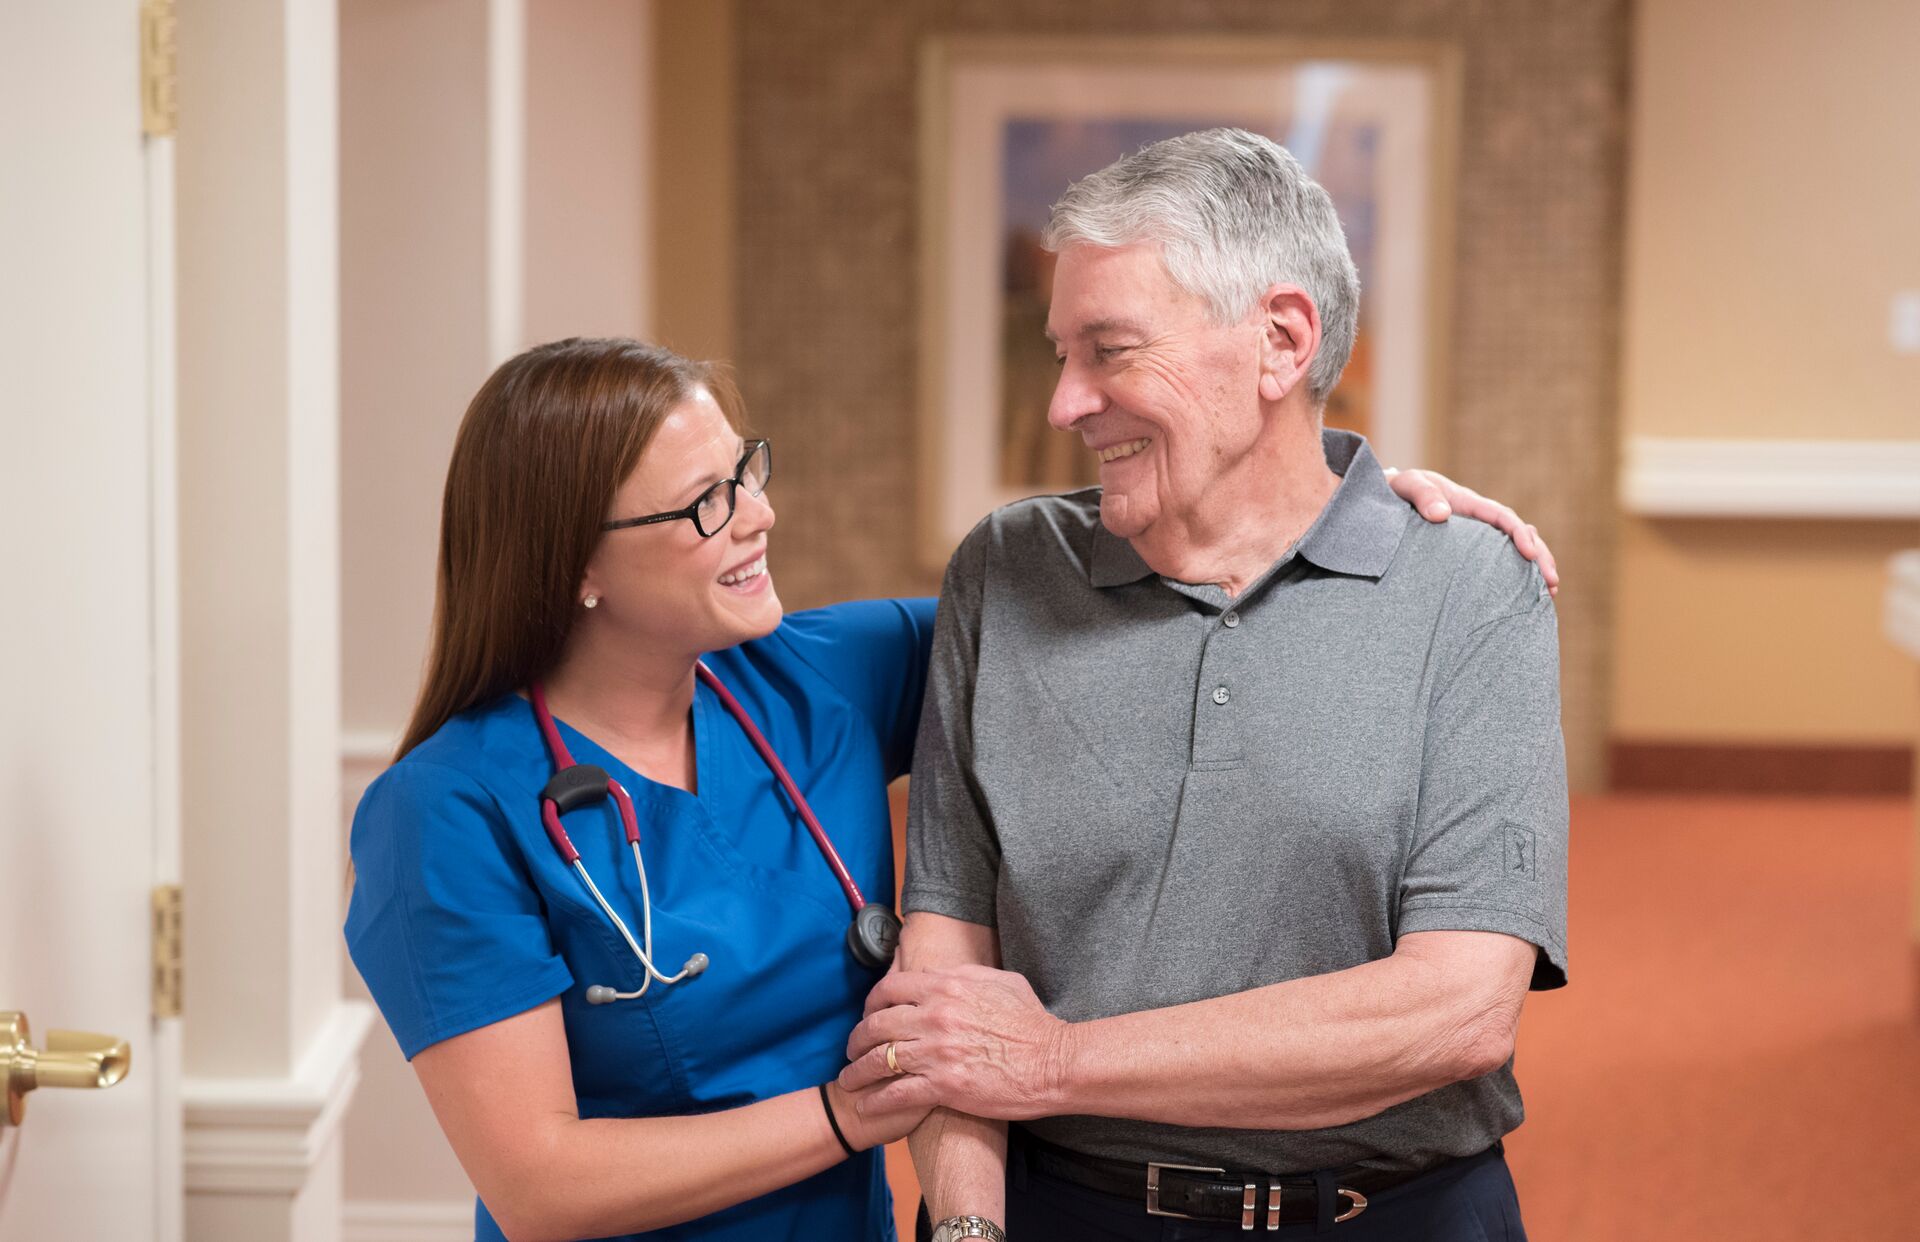 A senior man walks with assistance from a smiling nurse.